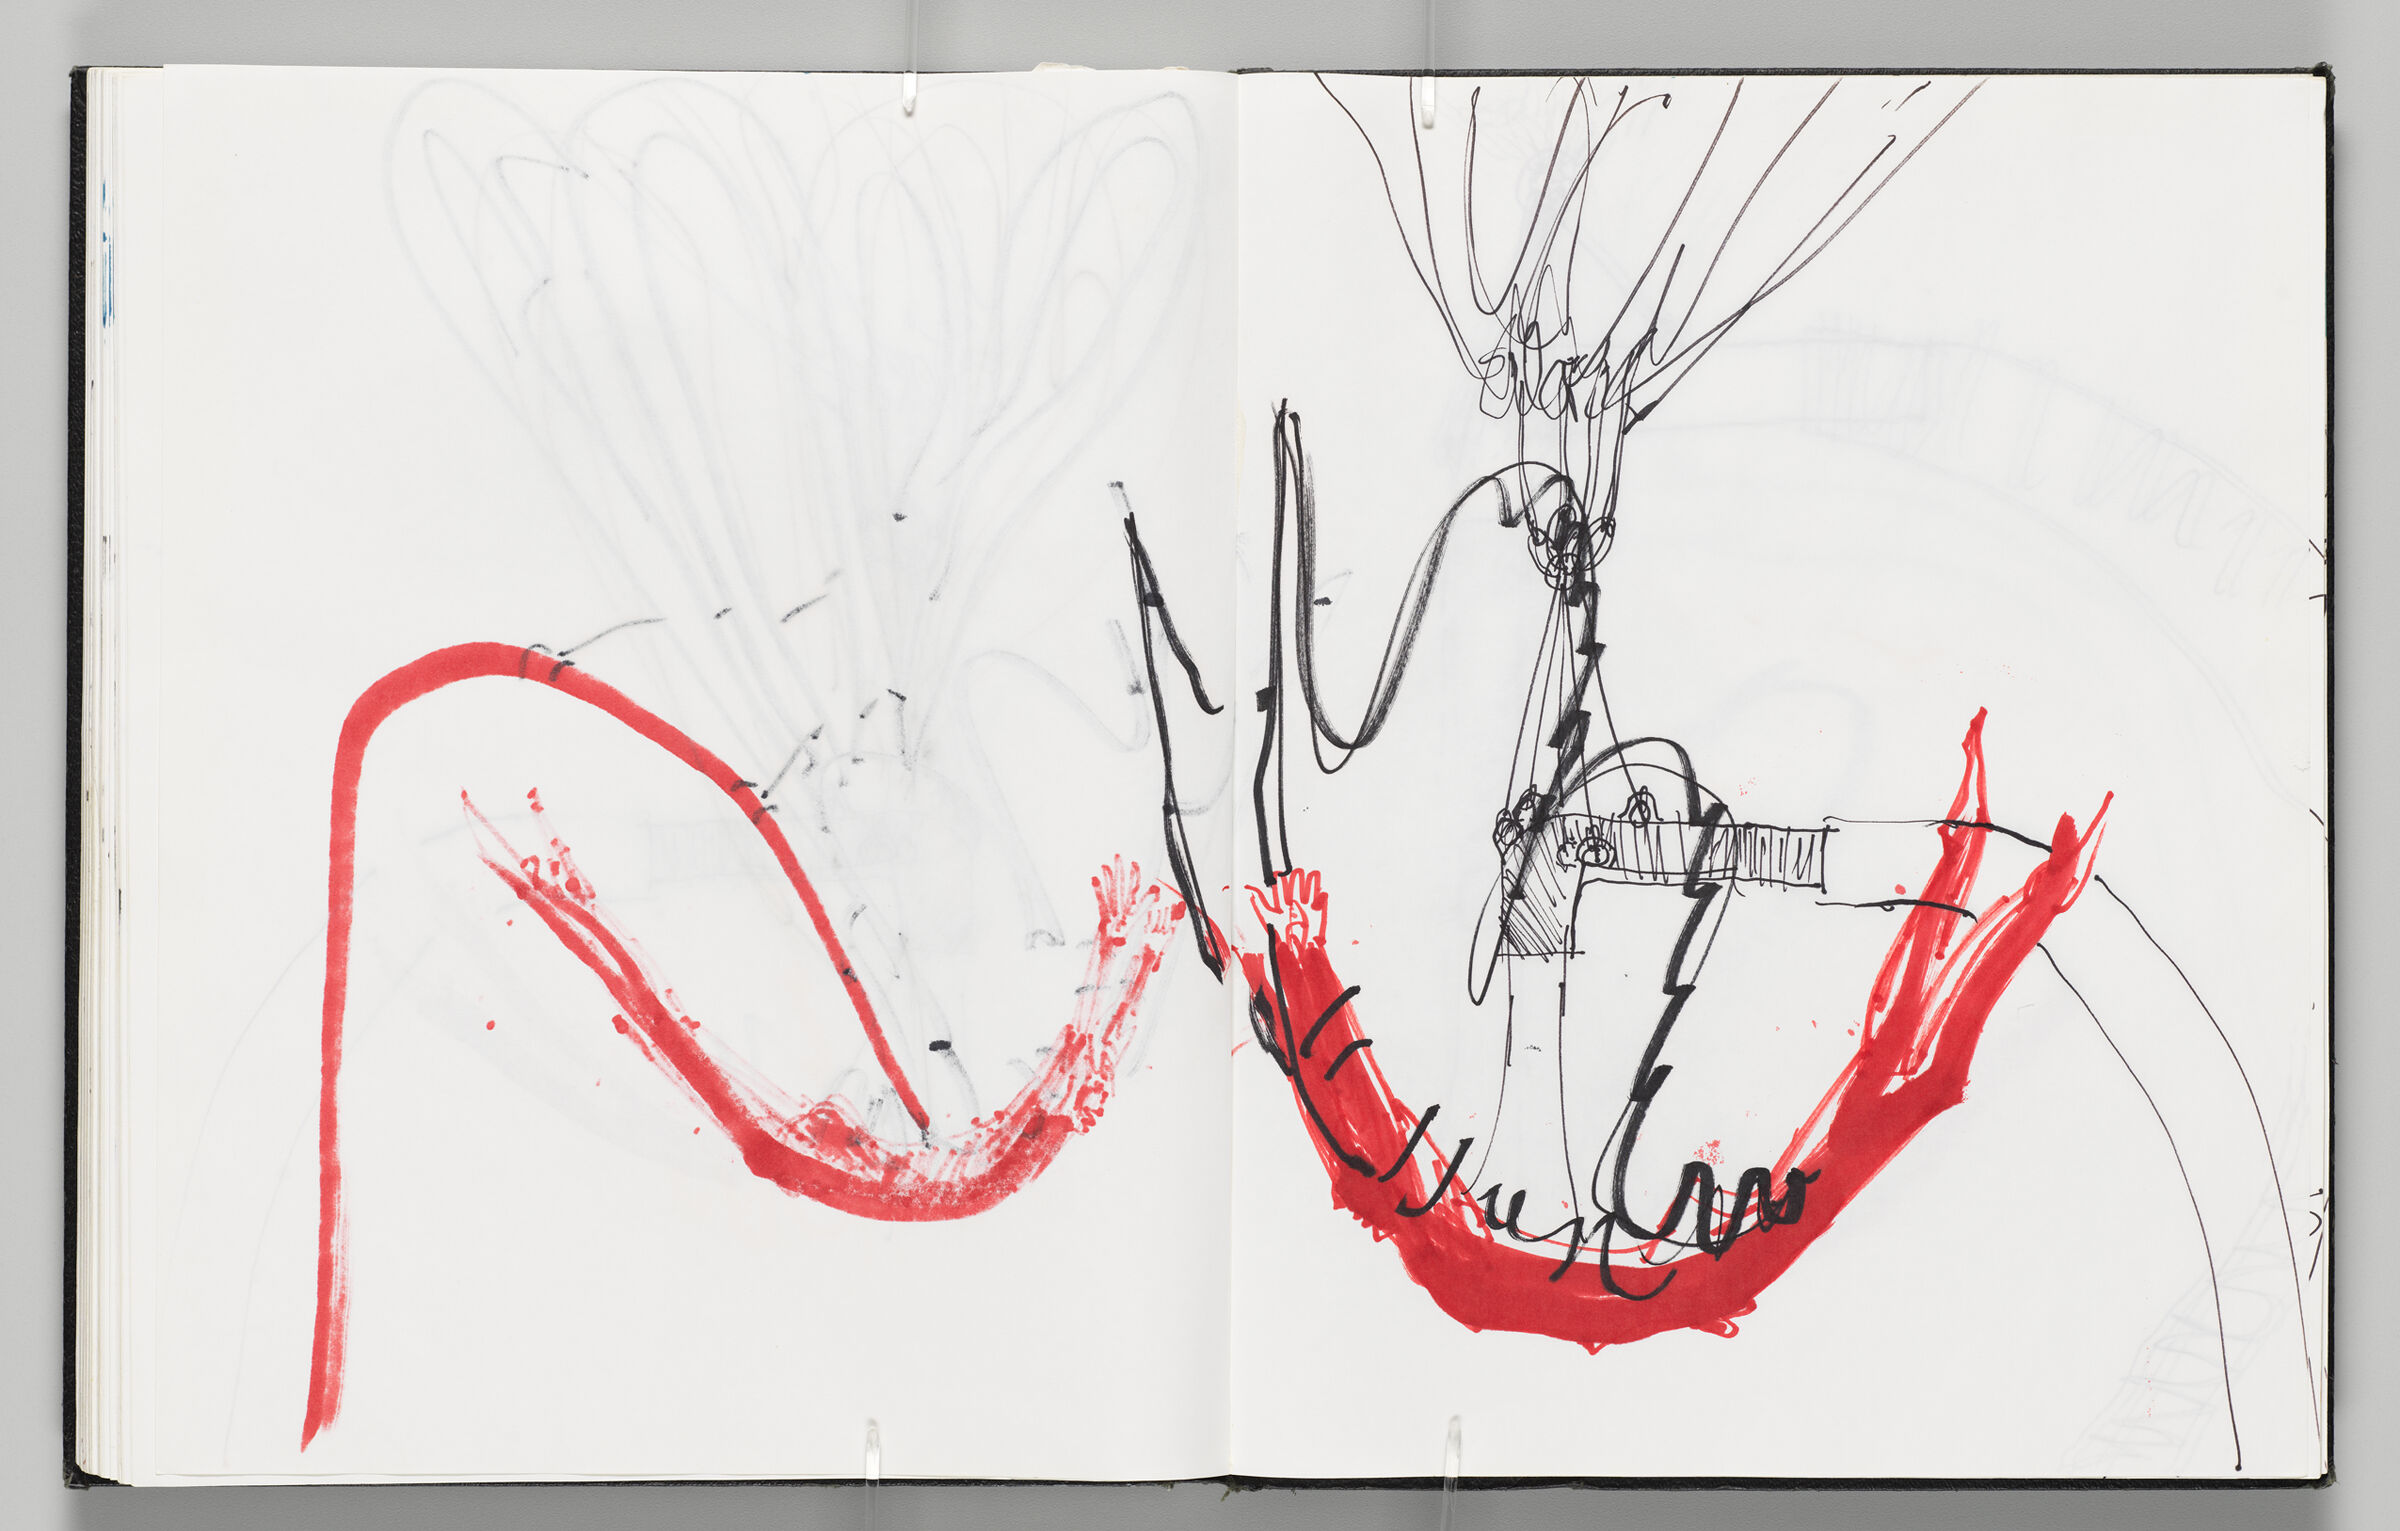 Untitled (Bleed-Through Of Previous Page, Left Page); Untitled (Sketch Of Icarus And Mapping Of Inflatable Locations With Faint Color Transfer, Right Page)